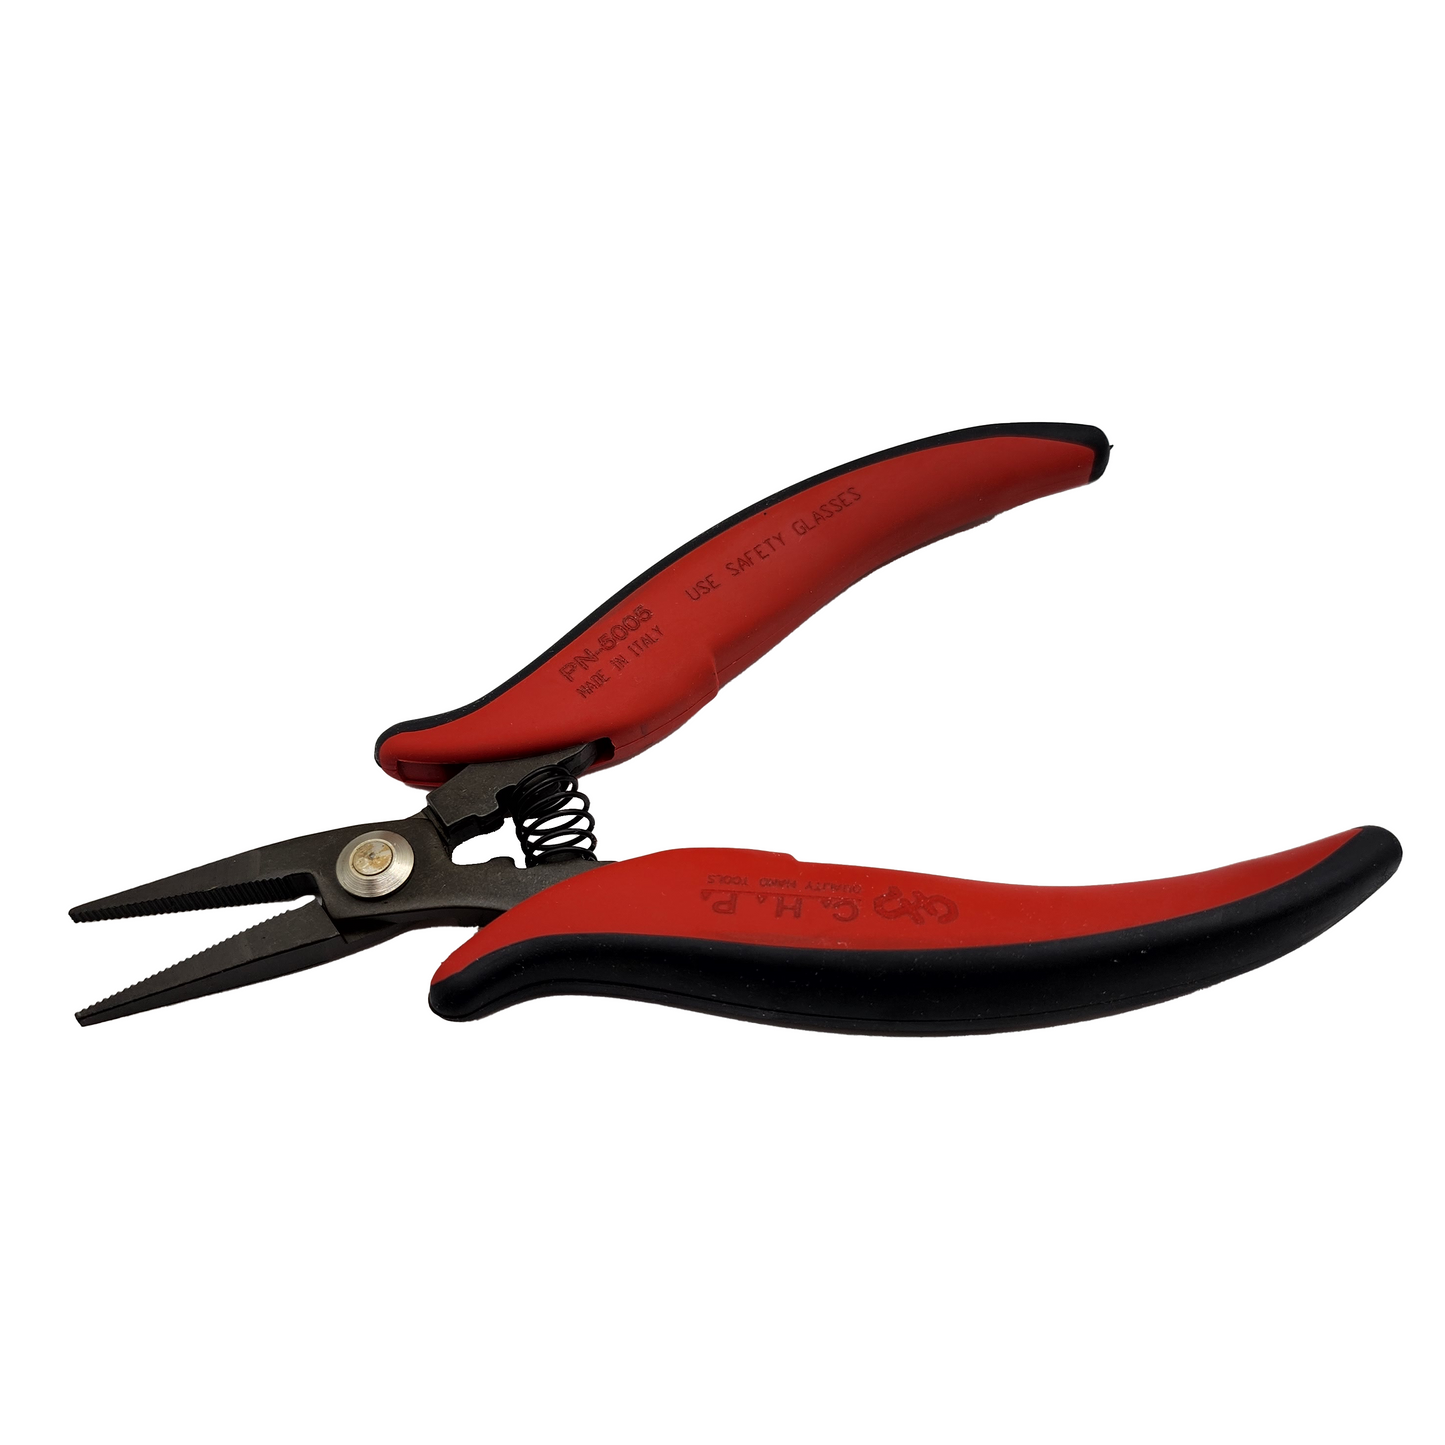 CHP_ CHP PN-5005_ Cutters, Pliers, Multi-Tools_ Hakko Products